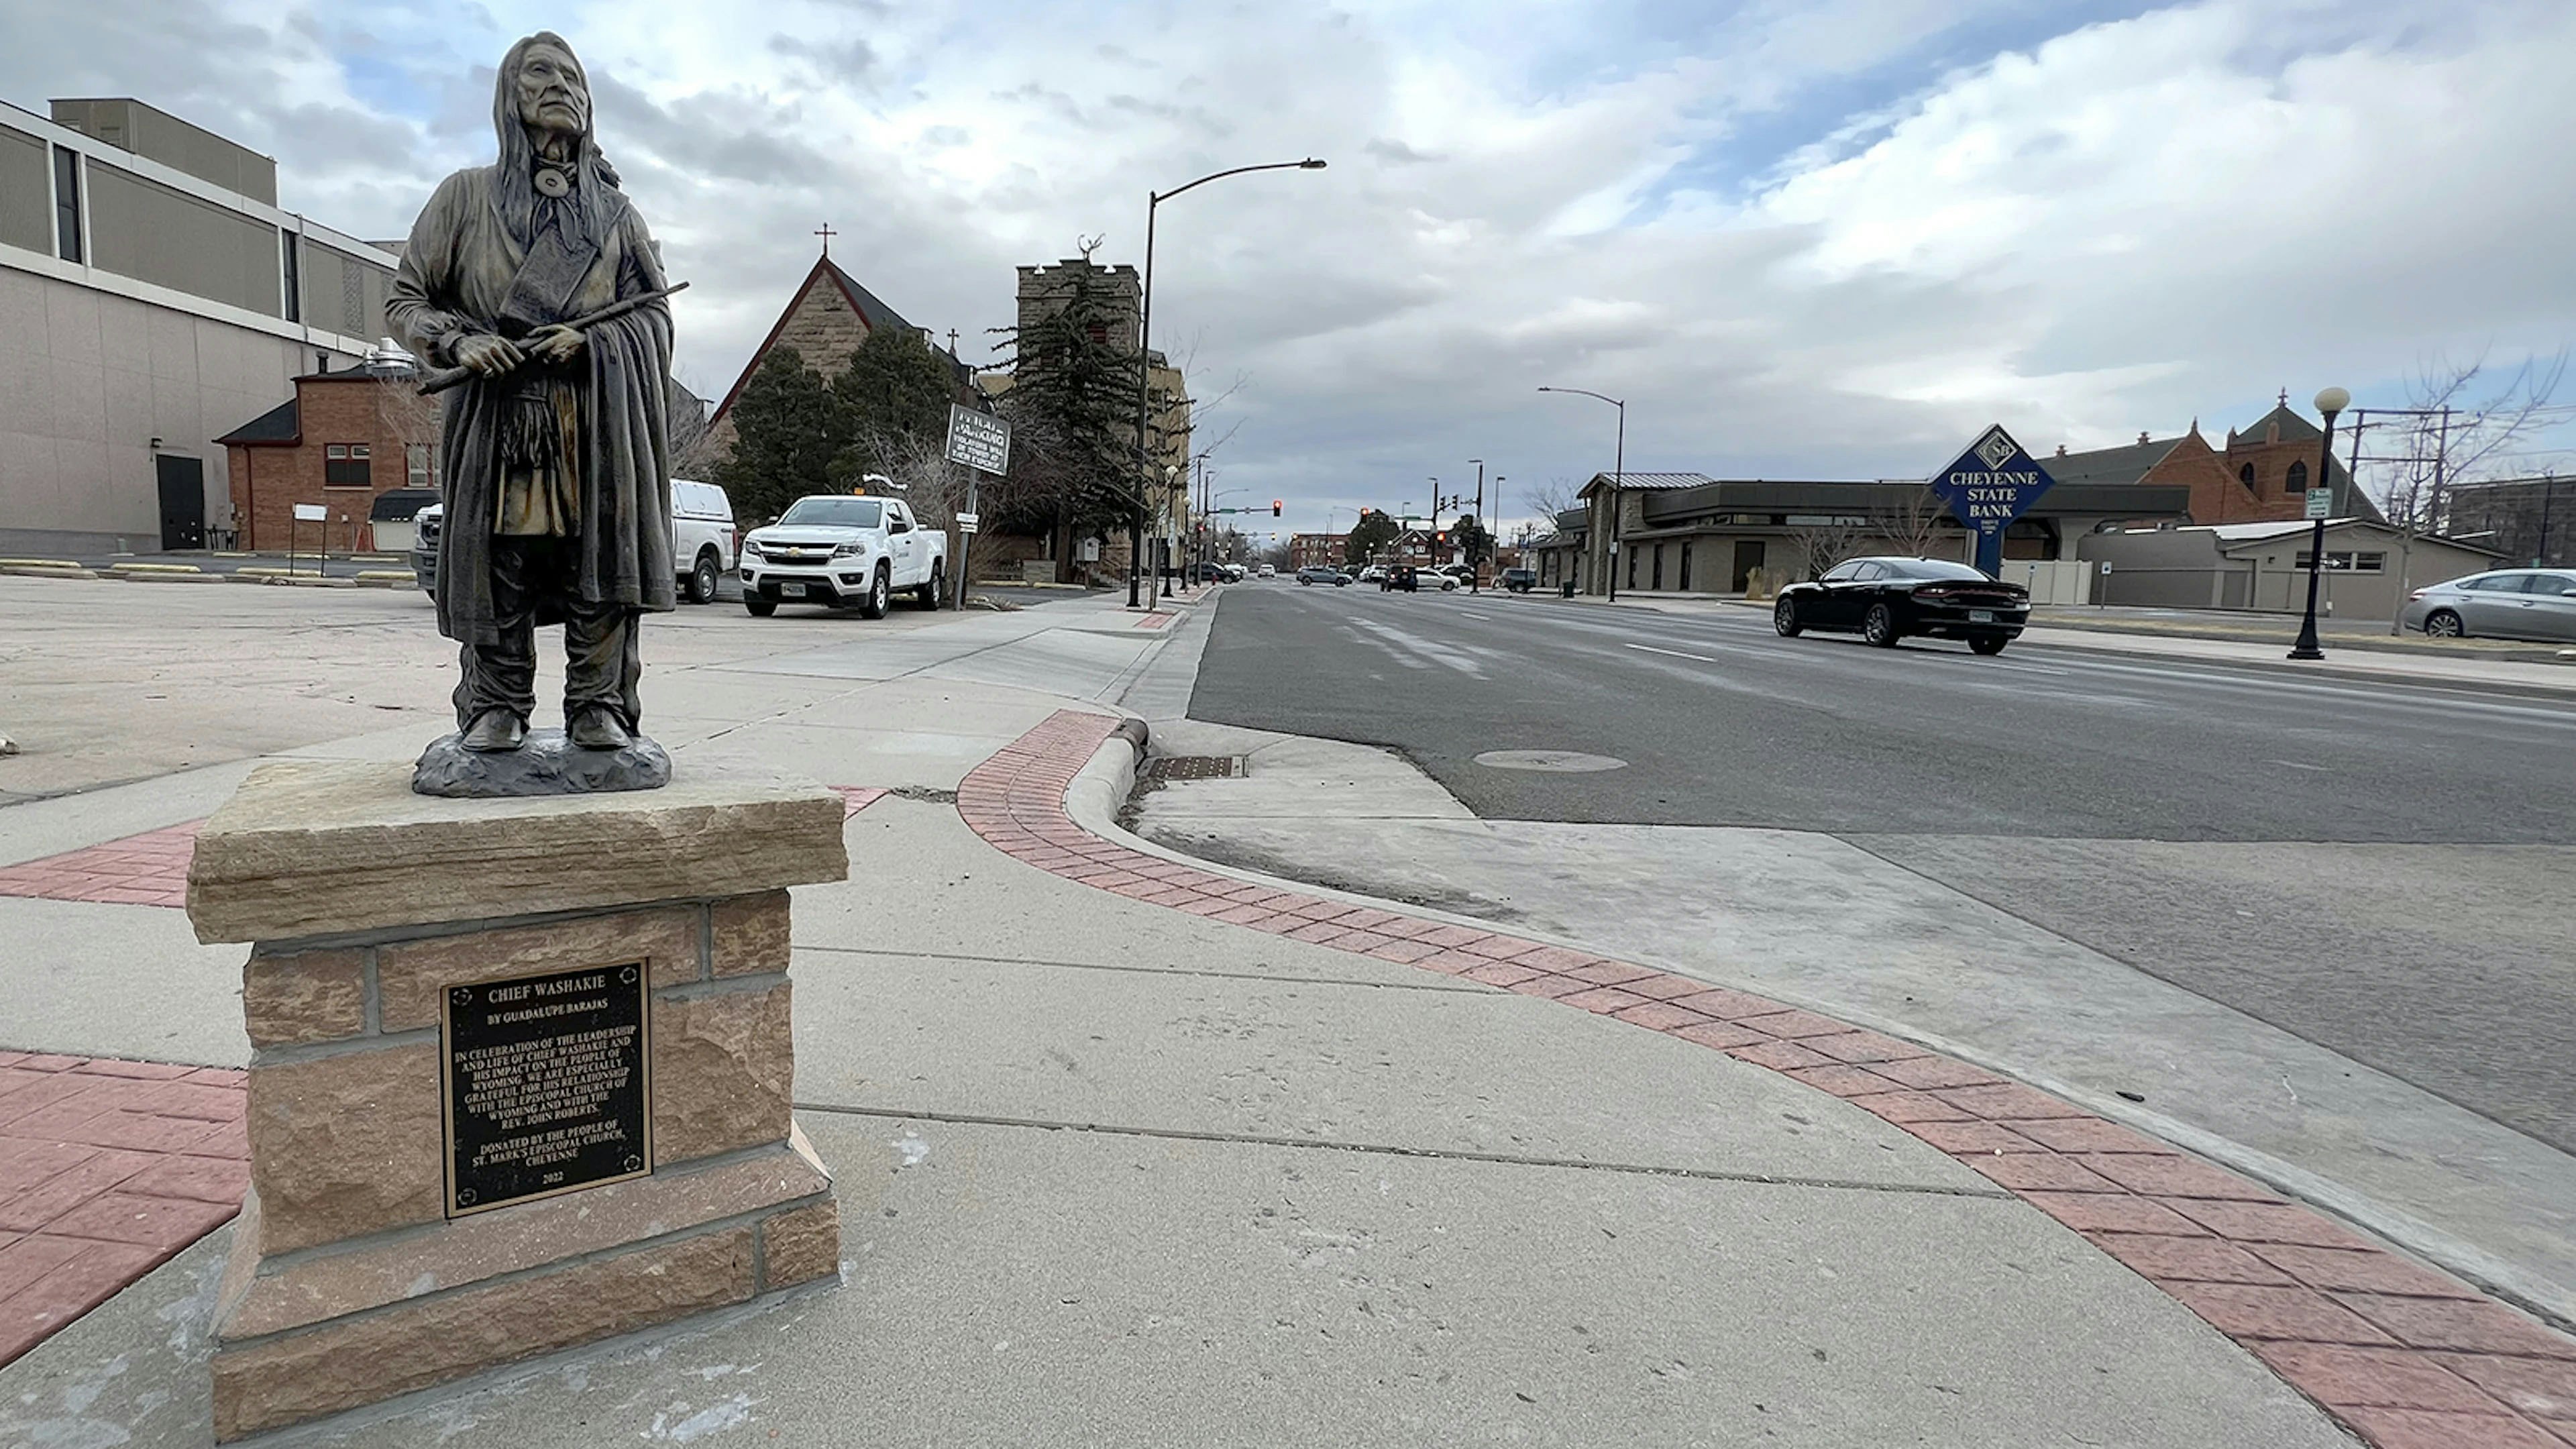 Chief Washakie, the legendary Estern Shoshone leader, is honored for his place in Wyoming history through several sculptures around the state, including this one in Cheyenne.